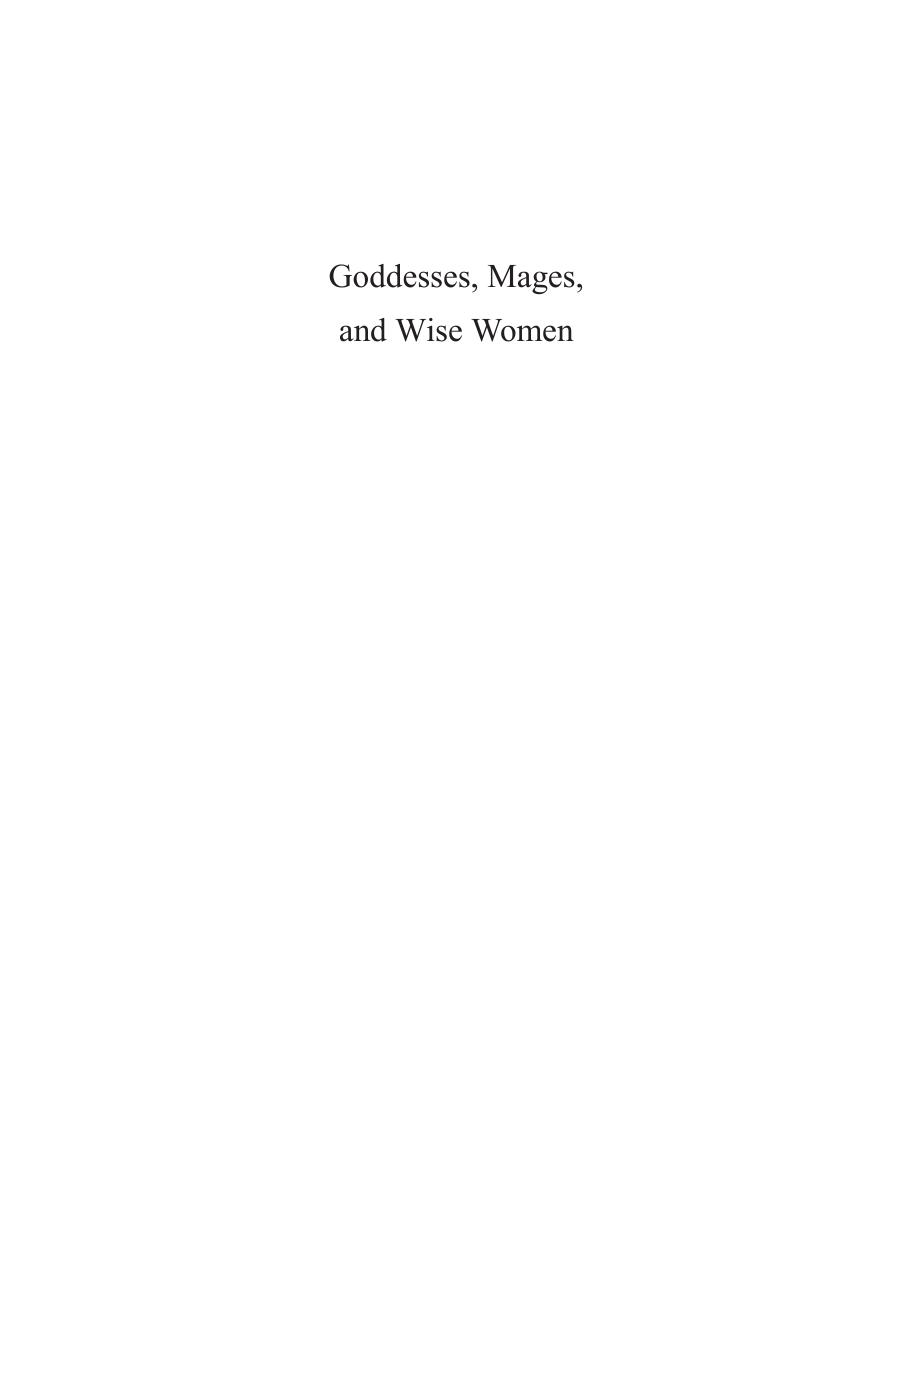 Goddesses, Mages, and Wise Women : The Female Pastoral Guide in the Sixteenth and Seventeenth Century English Drama by Sharon R. Yang